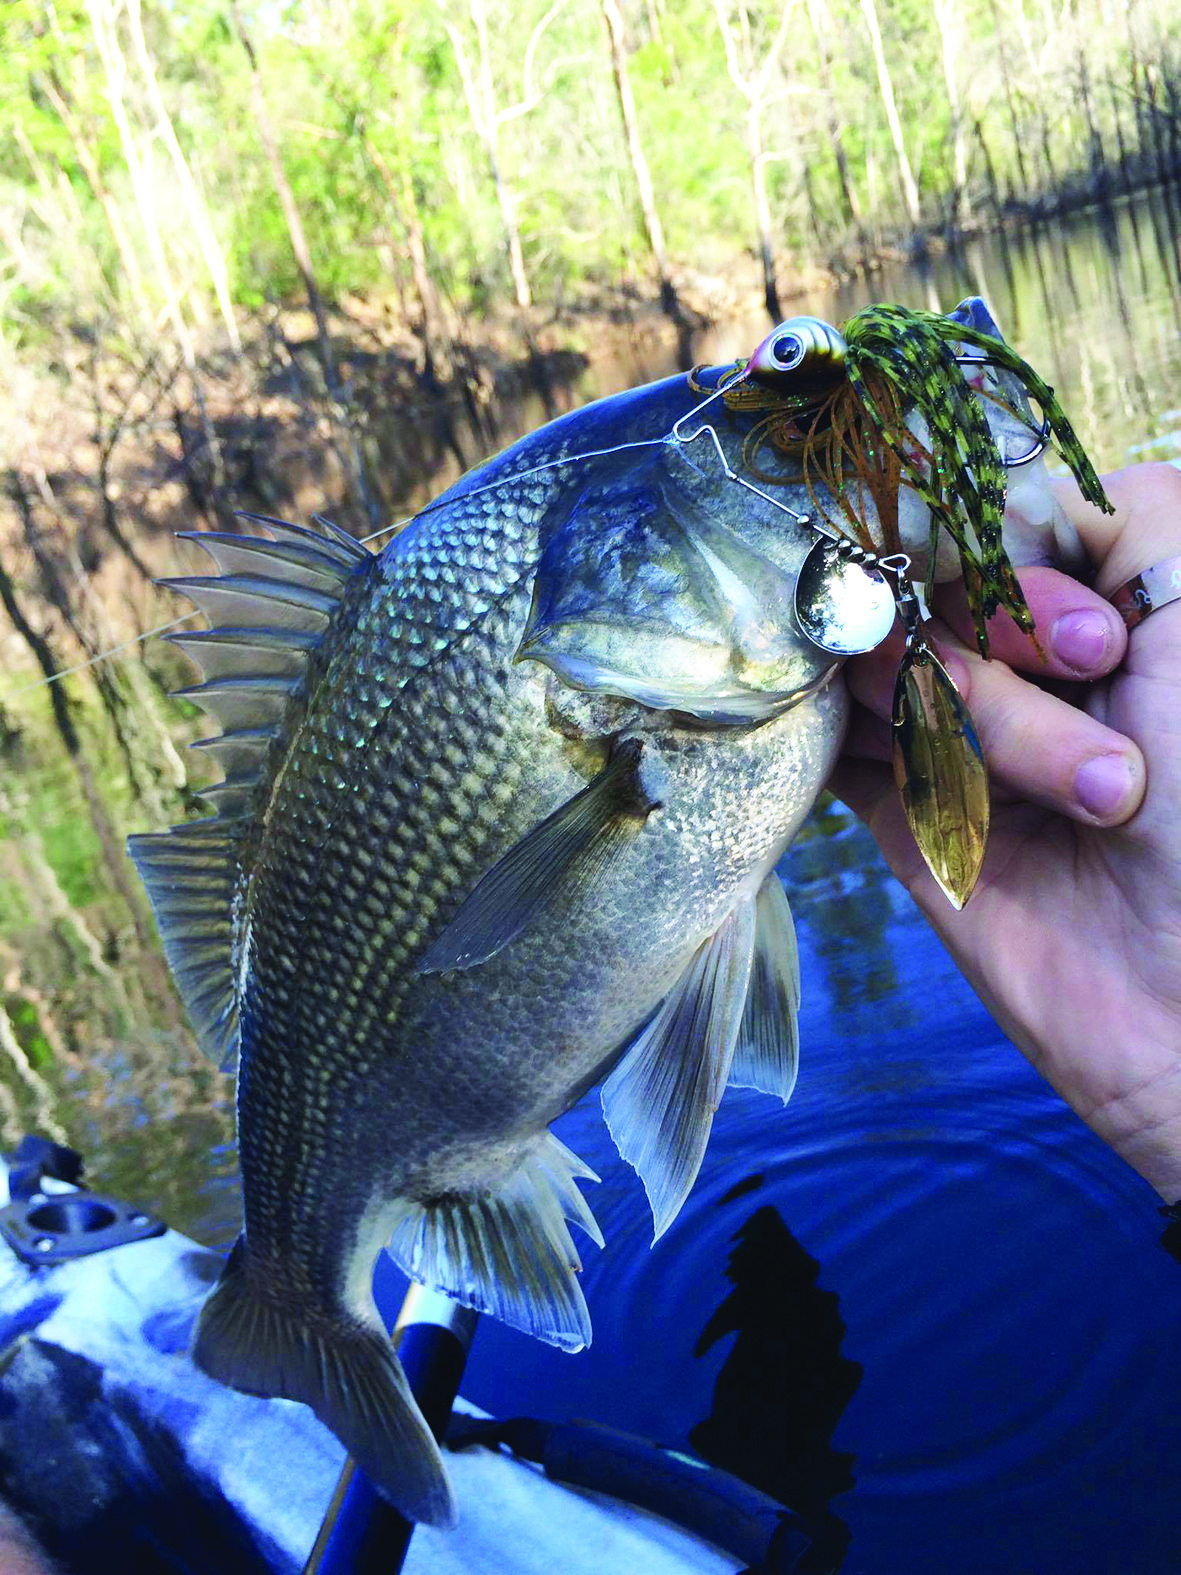 A Damiki Short Strike Spinnerbait triggered this bass to bite.